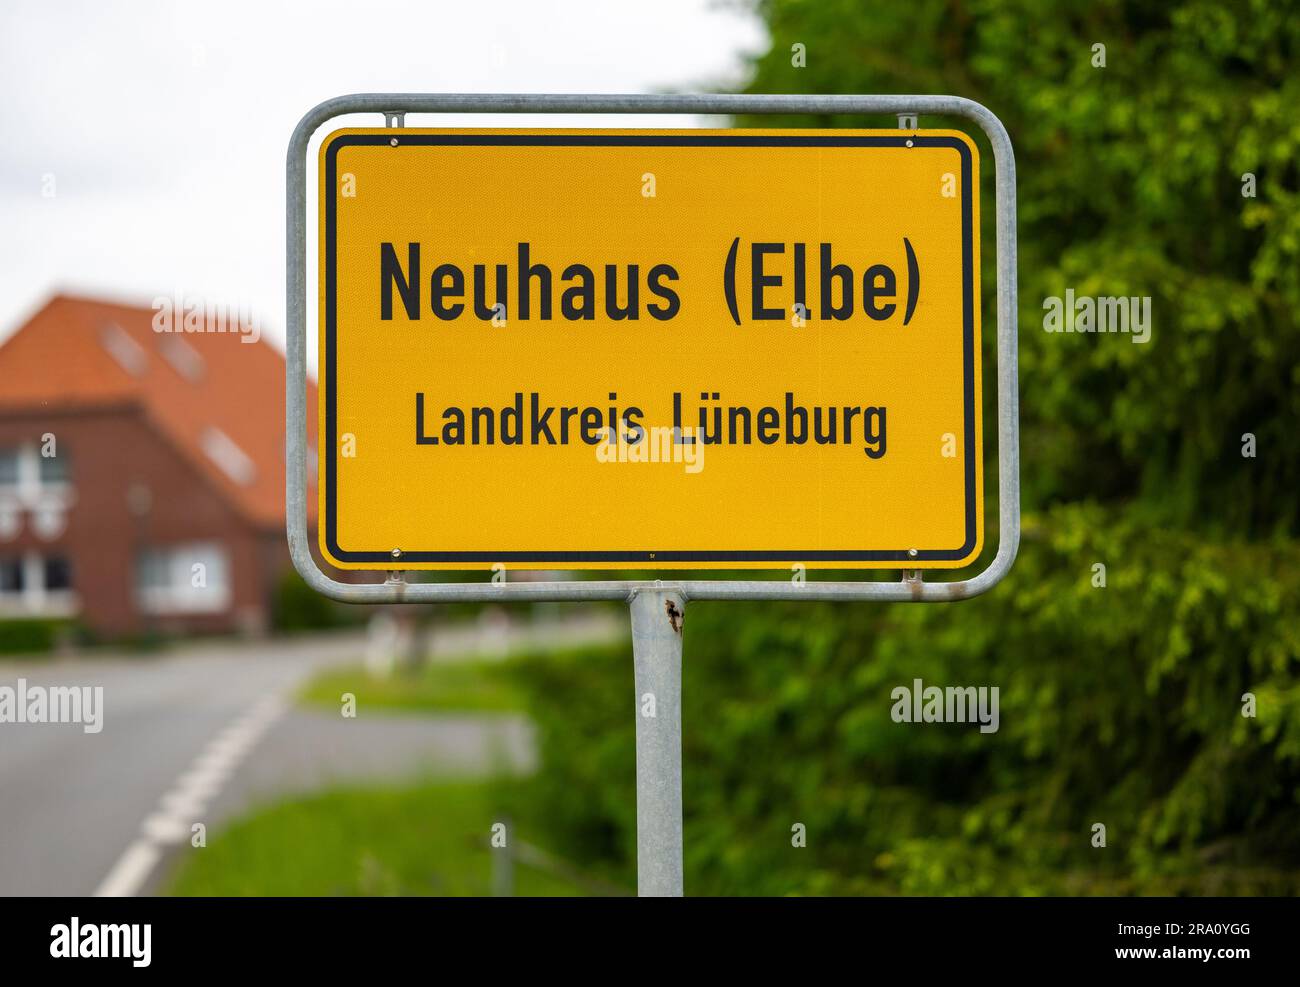 PRODUCTION - 24 May 2023, Lower Saxony, Amt Neuhaus: The town sign of Neuhaus (Elbe). The end of June marks the 30th anniversary of the reincorporation of the municipality of Amt Neuhaus and parts of the town of Bleckede into the district of Lüneburg. Since 1993, Amt Neuhaus and parts of the town of Bleckede have once again belonged to the district of Lüneburg. During the German division, the towns on the right bank of the Elbe were part of the GDR. After the German reunification the unification took place. On June 30, 1993, the reincorporation of the municipality of Amt Neuhaus and the distri Stock Photo